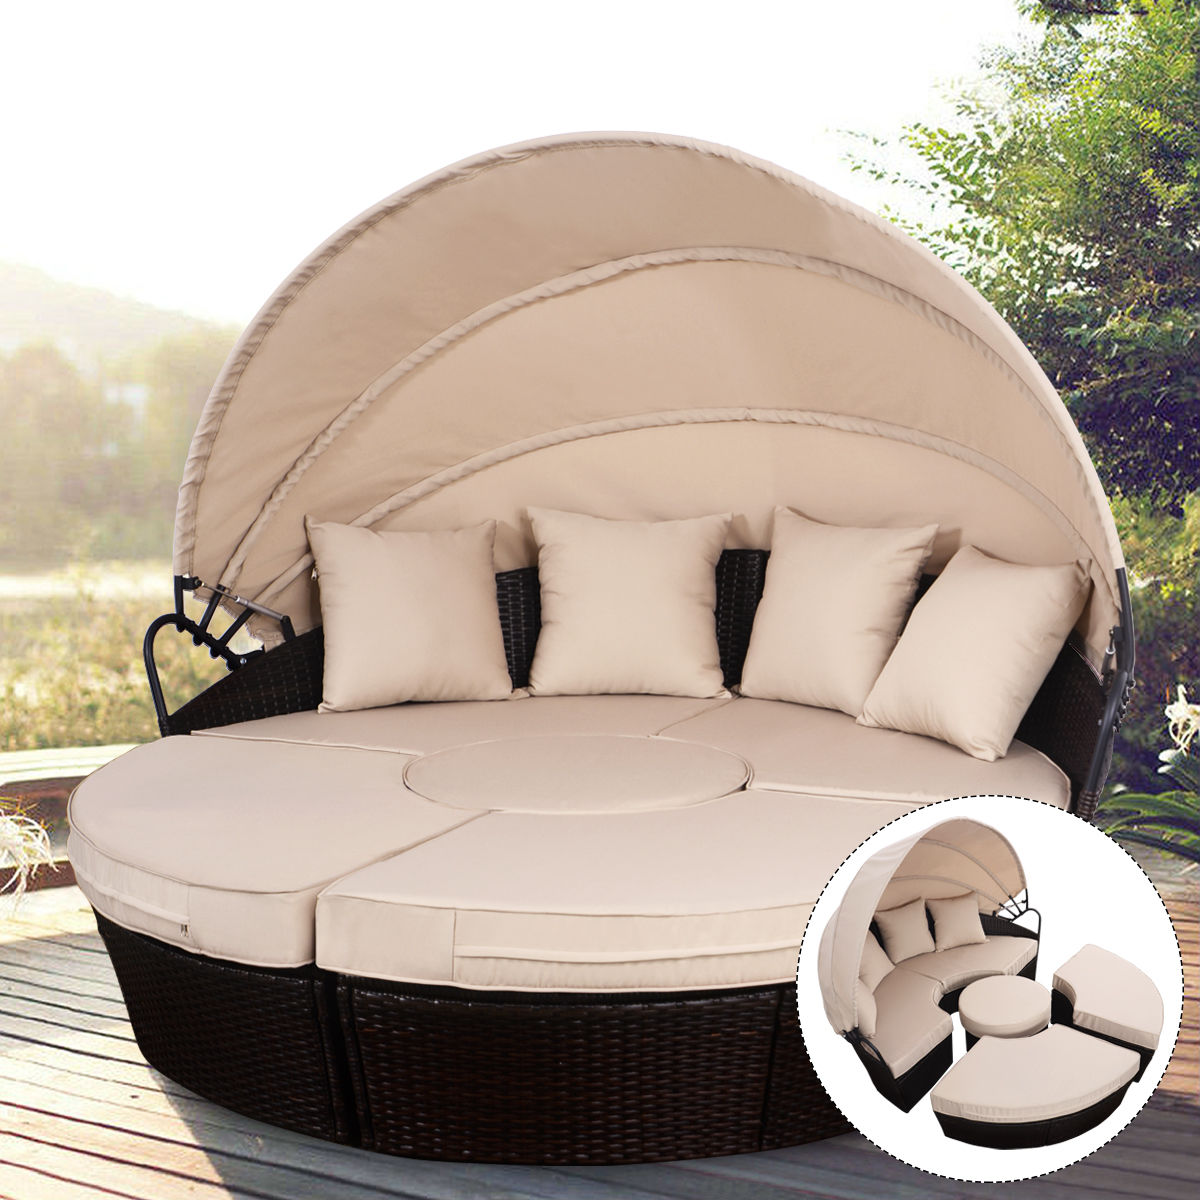 Outdoor Daybed Patio Sofa Furniture Brown, Outdoor Daybed Patio Furniture With Cushions